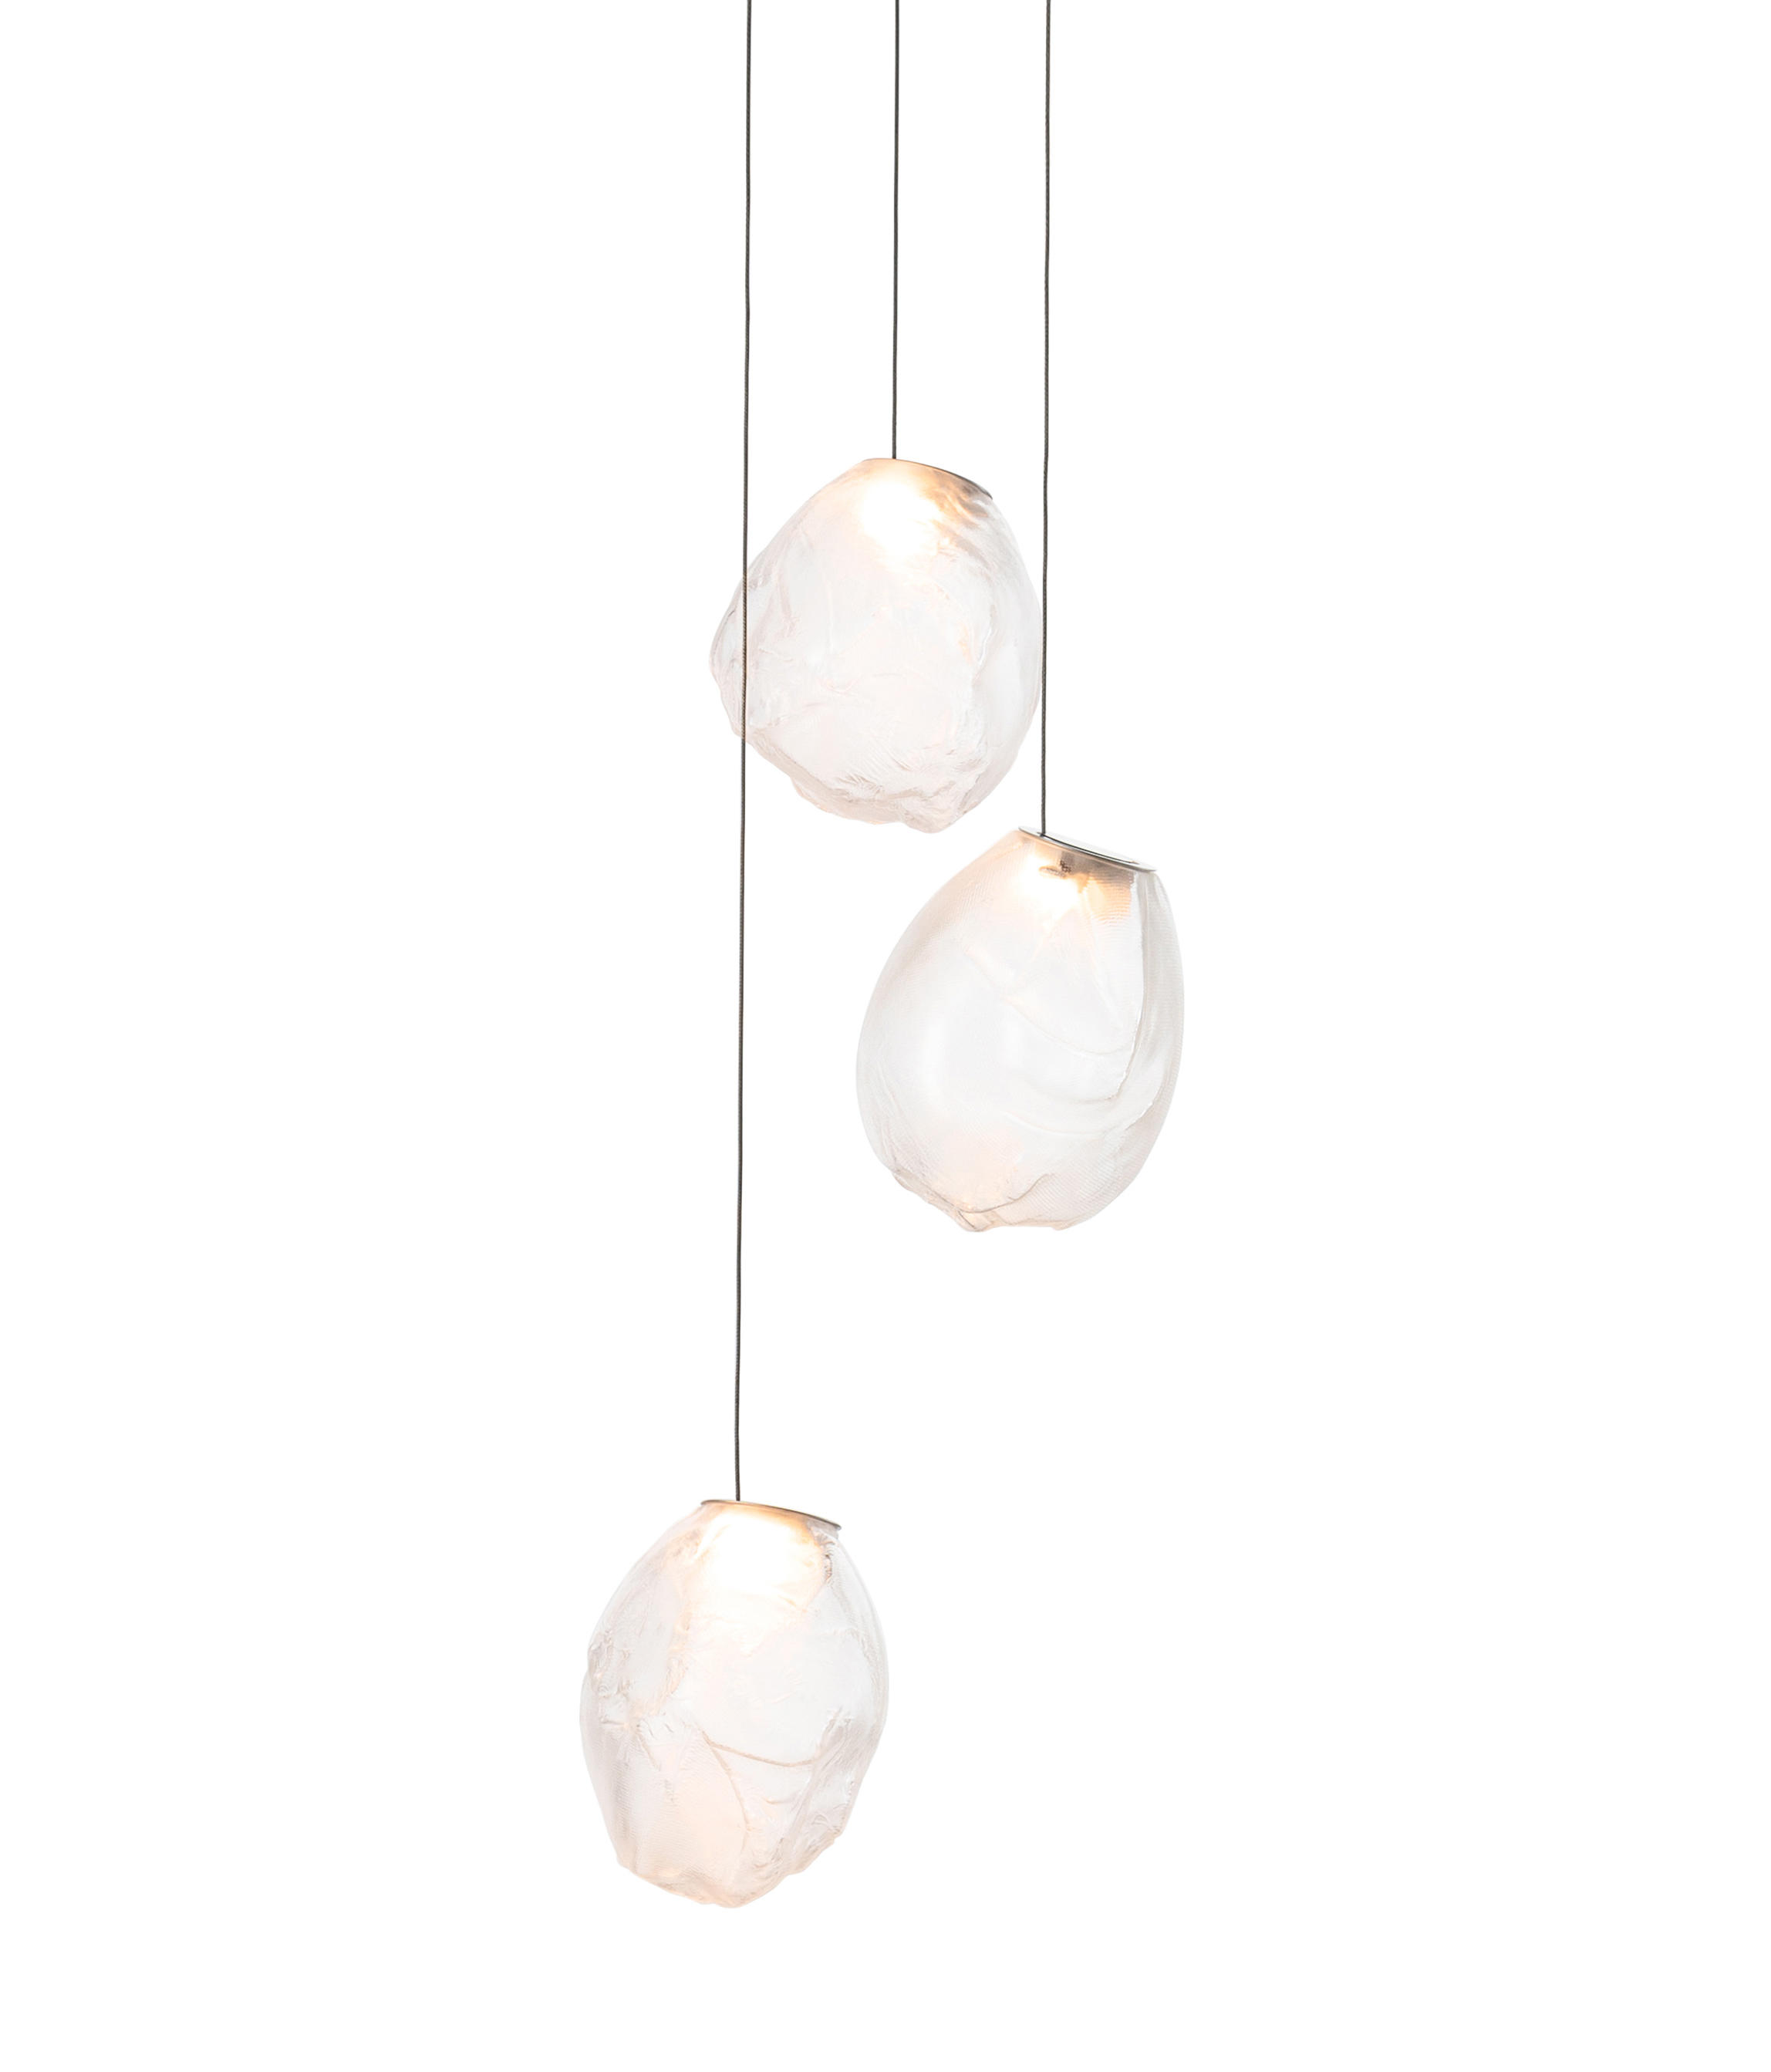 Suspended Lights From Bocci Architonic